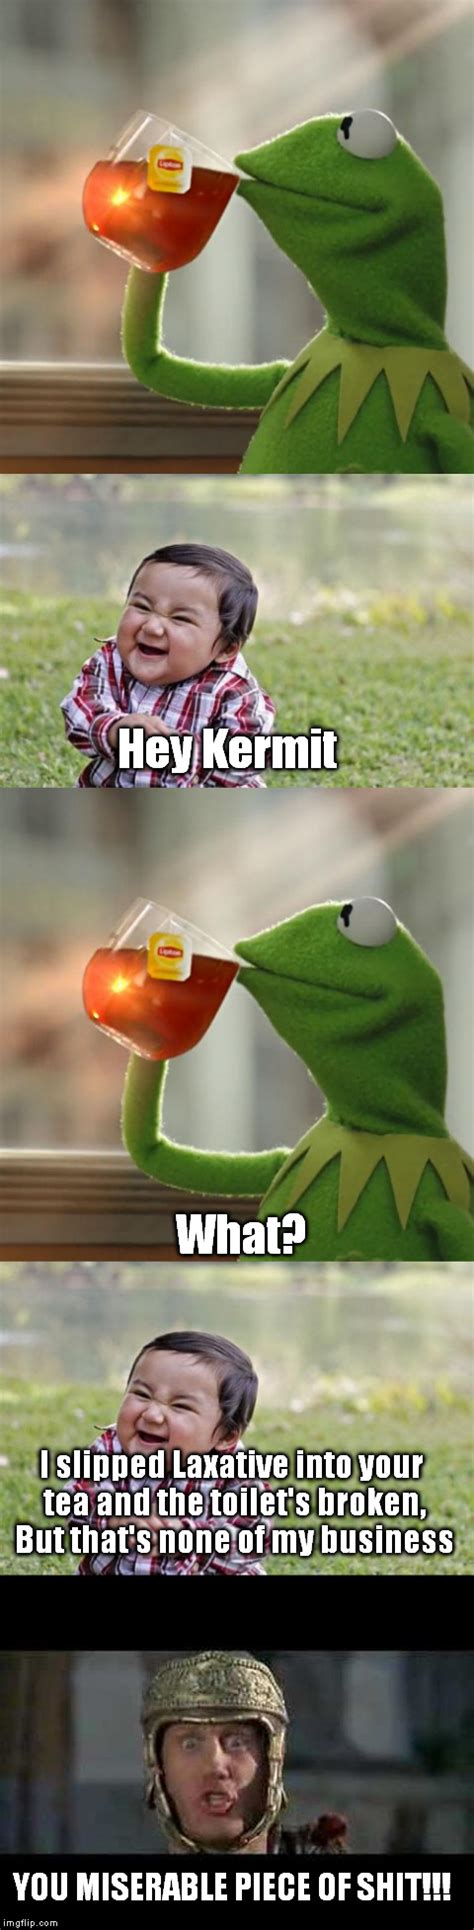 Kermit Vs The Evil Toddler And A Miserable Piece Of Shit